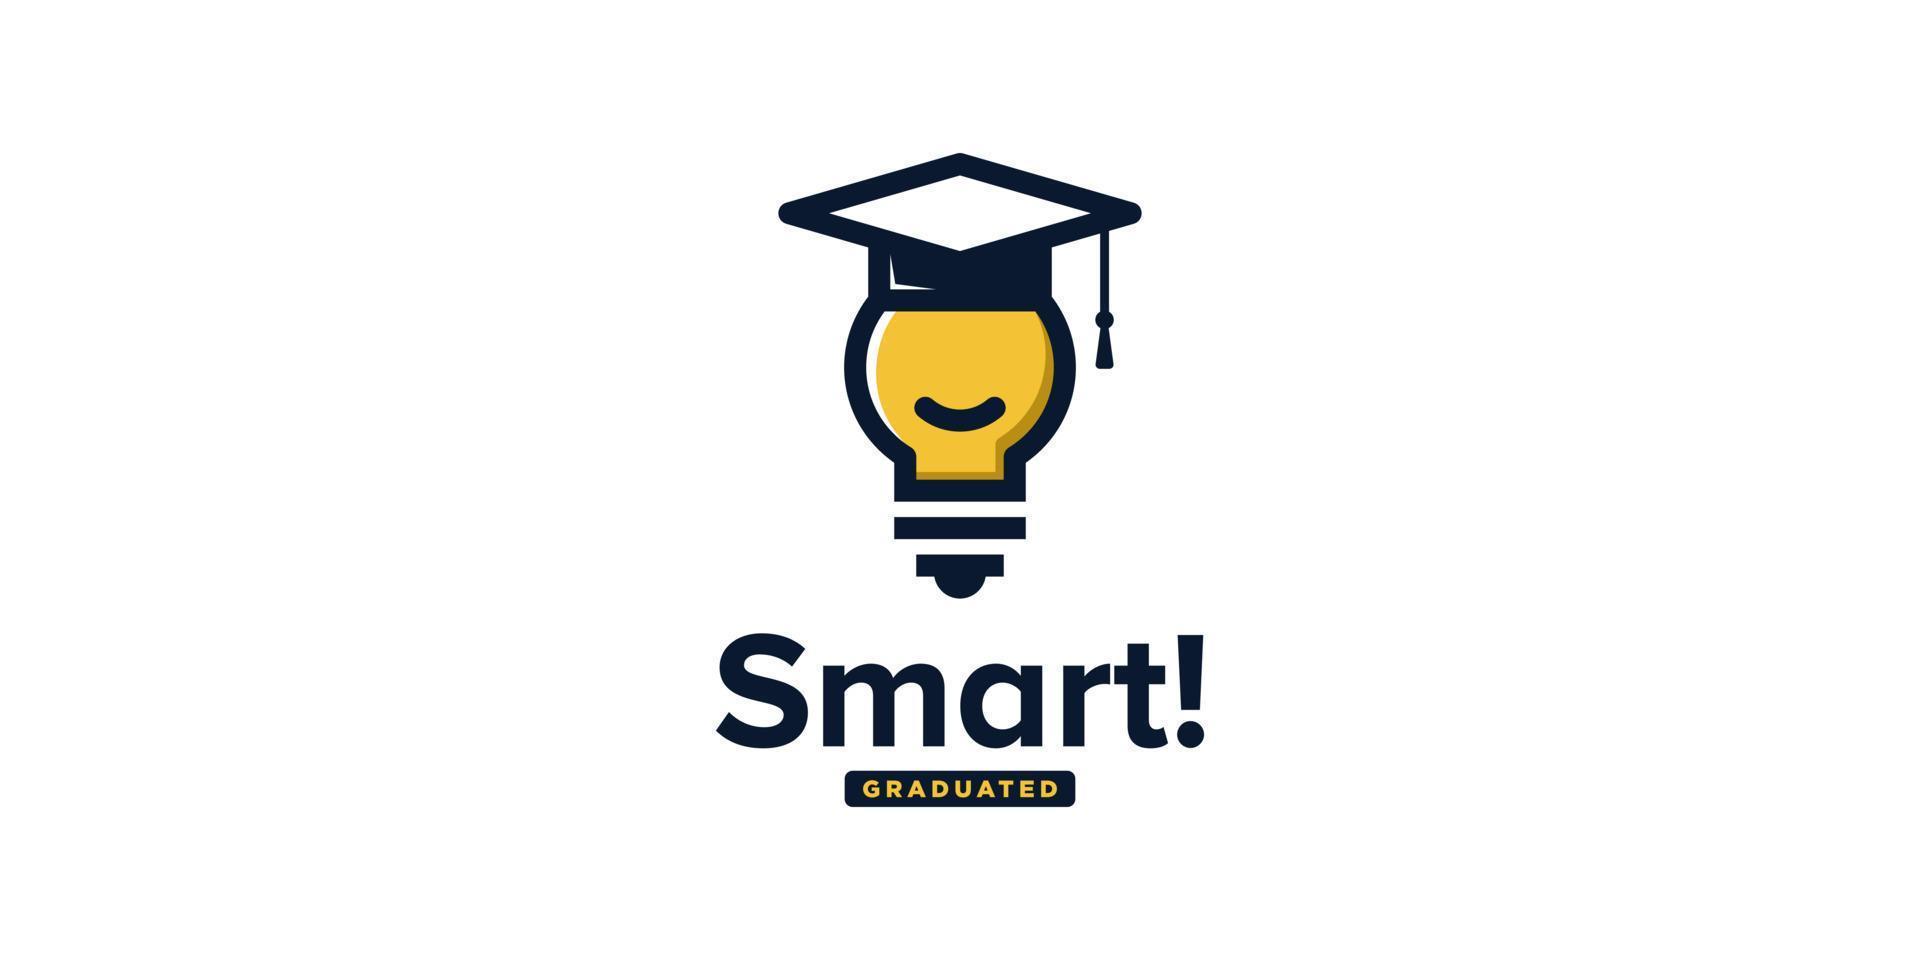 Toga cap with light bulb. Education Smart Graduate. College Study with Lamp. Vector Logo Design